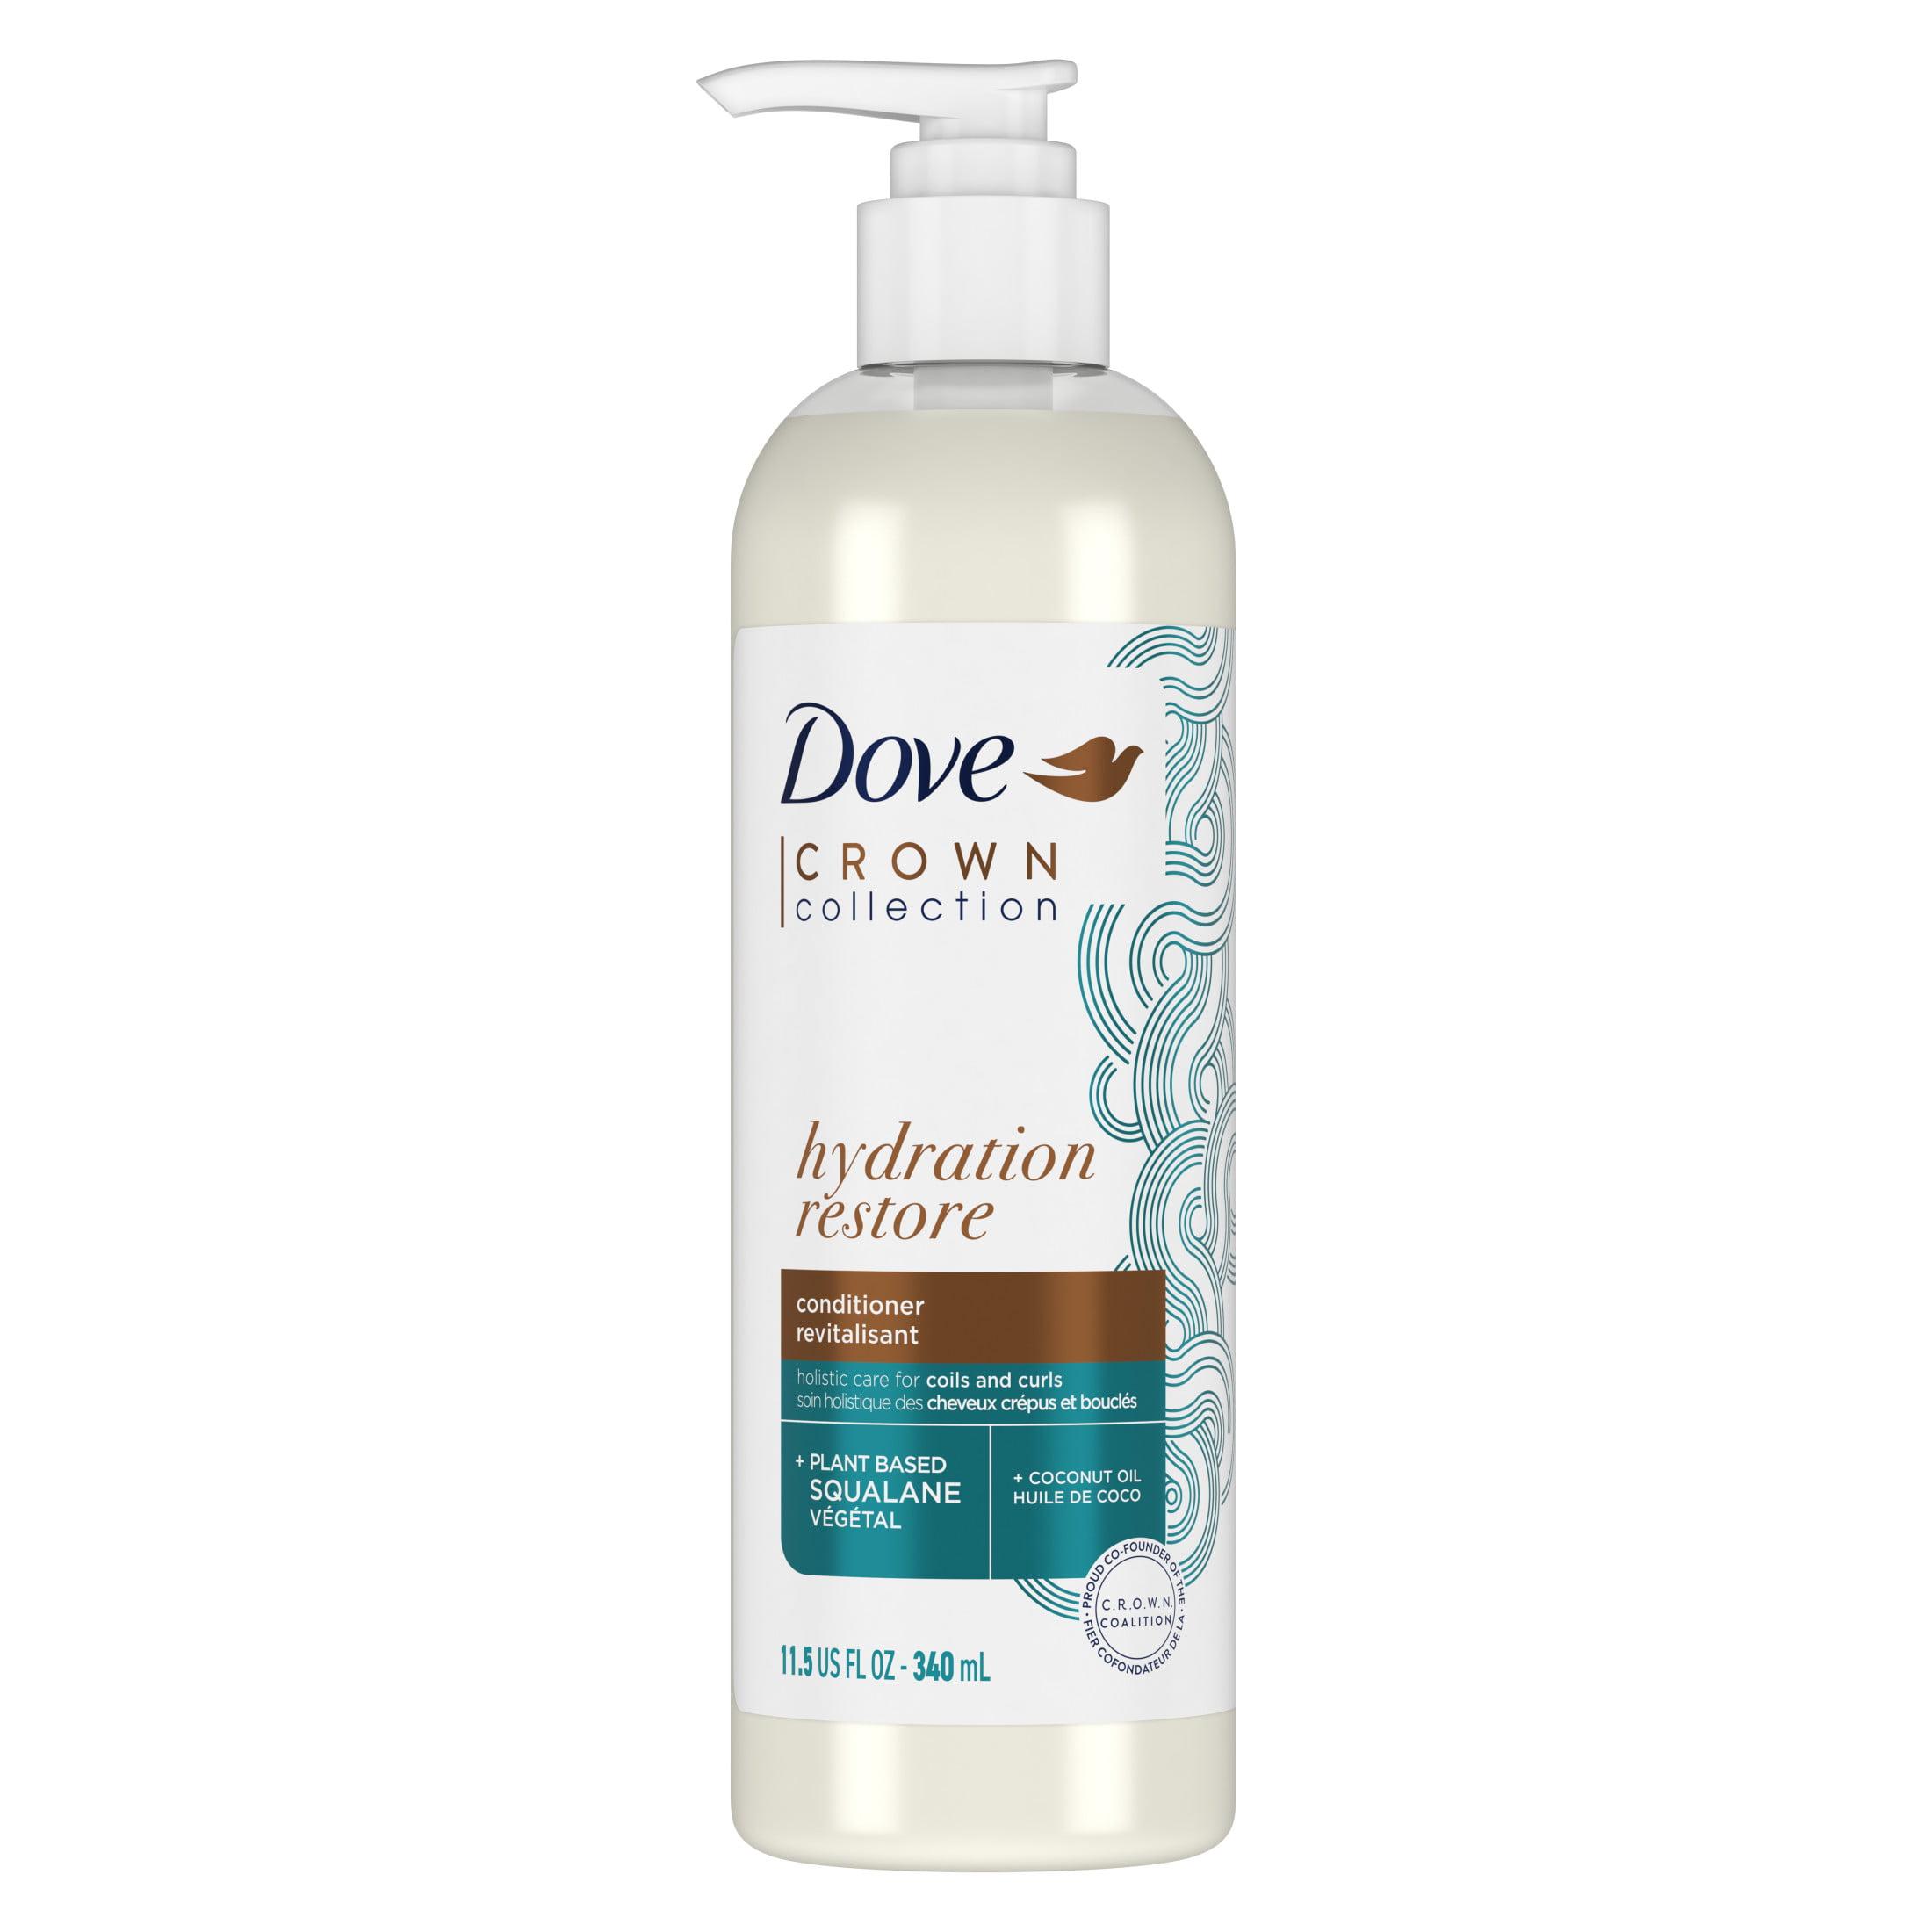 Dove Crown Collection Hydration Restore Detanglers for Curly Hair with Coconut Oil, 11.5 fl oz - image 1 of 10